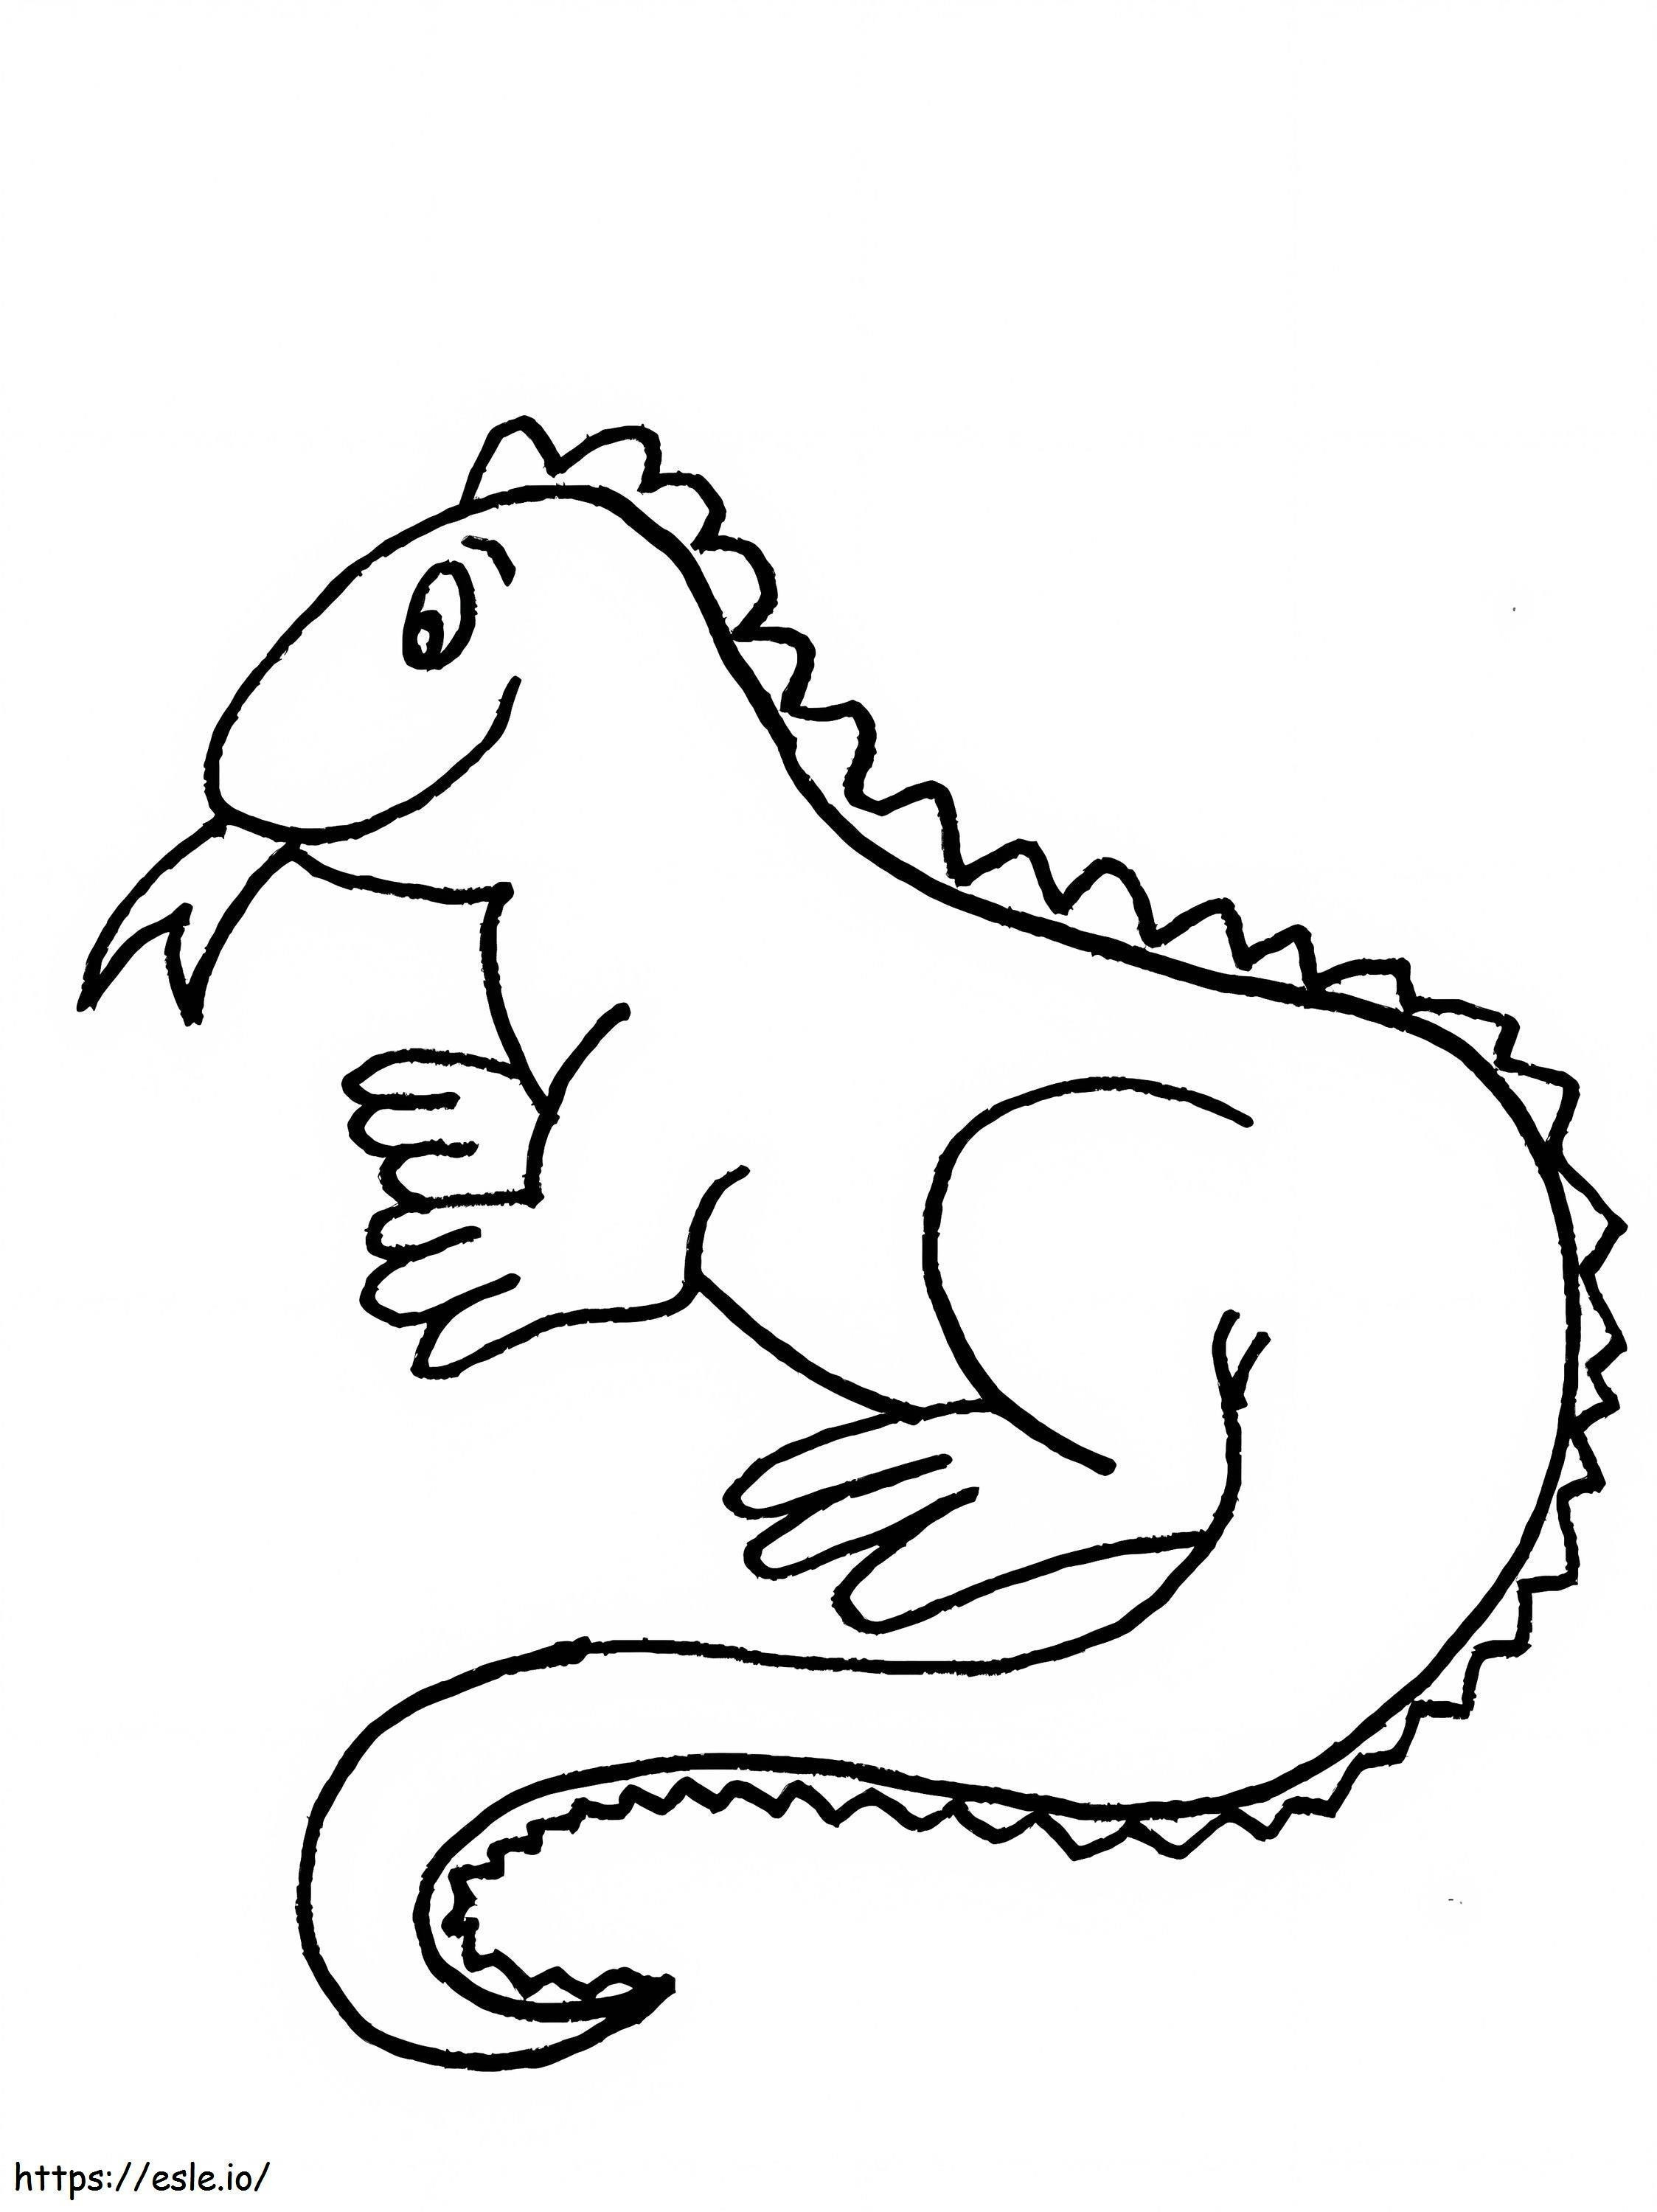 Happy Iguana coloring page